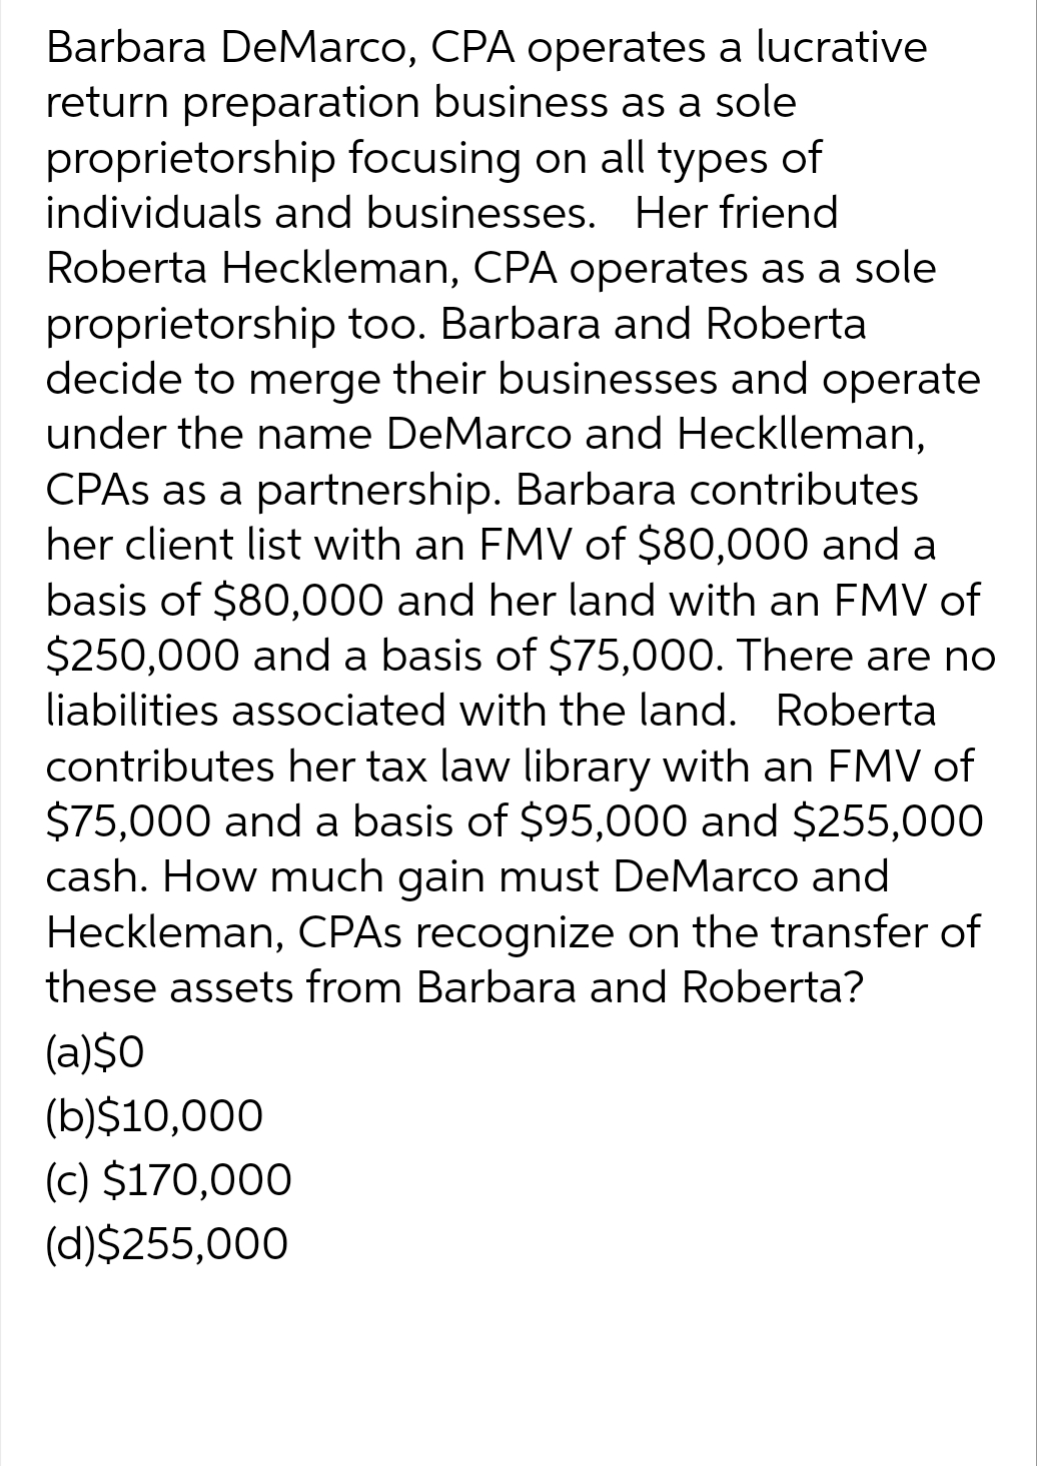 Barbara DeMarco, CPA operates a lucrative
return preparation business as a sole
proprietorship focusing on all types of
individuals and businesses. Her friend
Roberta Heckleman, CPA operates as a sole
proprietorship too. Barbara and Roberta
decide to merge their businesses and operate
under the name DeMarco and Hecklleman,
CPAS as a partnership. Barbara contributes
her client list with an FMV of $80,000 and a
basis of $80,000 and her land with an FMV of
$250,000 and a basis of $75,000. There are no
liabilities associated with the land. Roberta
contributes her tax law library with an FMV of
$75,000 and a basis of $95,000 and $255,000
cash. How much gain must DeMarco and
Heckleman, CPAs recognize on the transfer of
these assets from Barbara and Roberta?
(a)$0
(b)$10,000
(c) $170,000
(d)$255,000